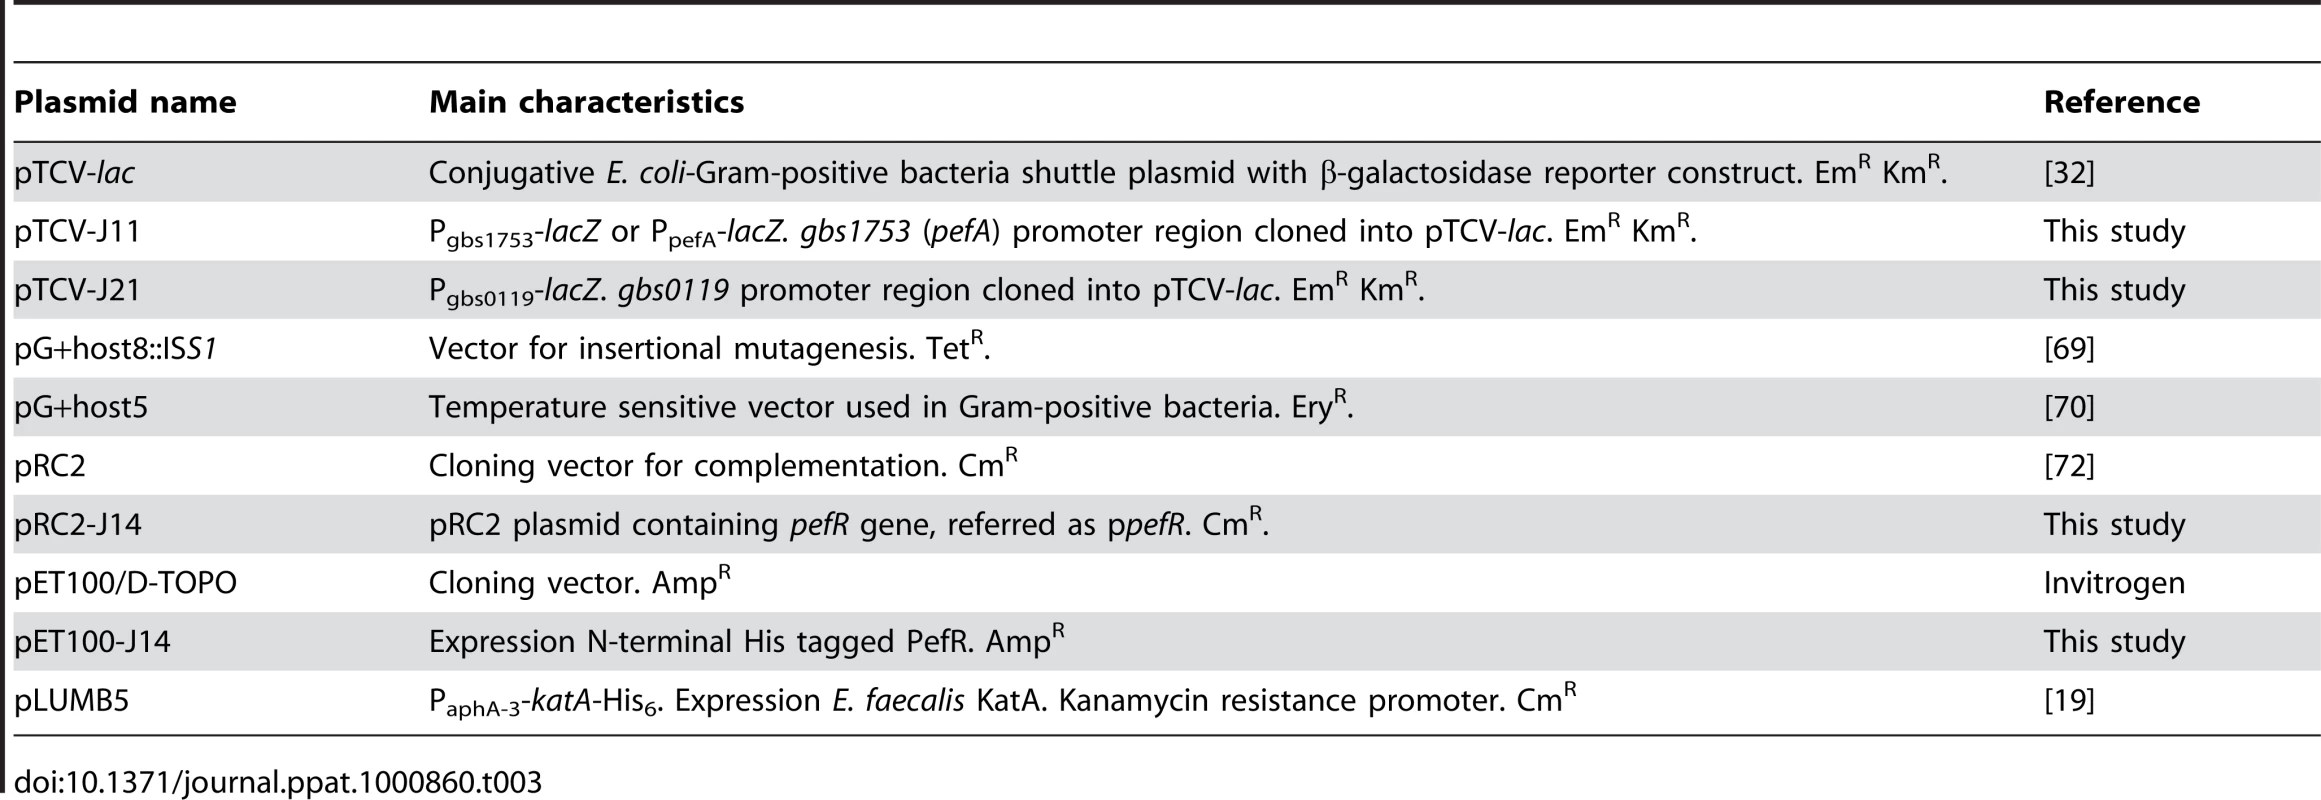 Plasmids used in this study.